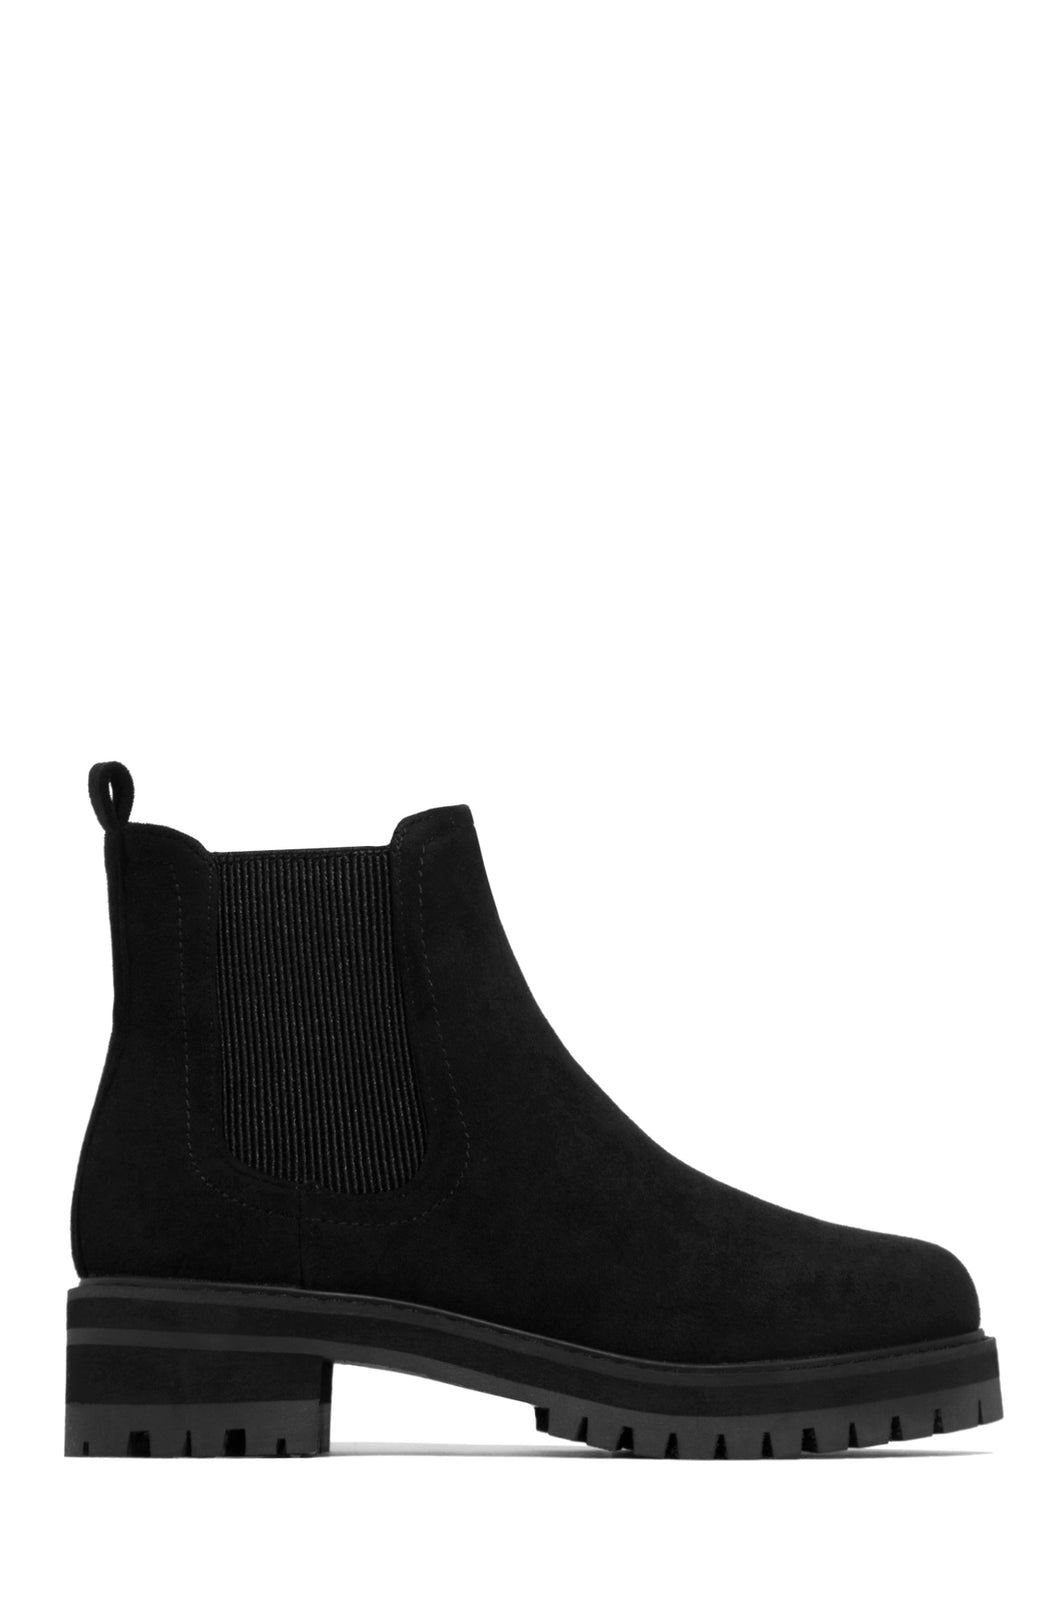 Fall Feels Pull On Chelsea Boots - Black